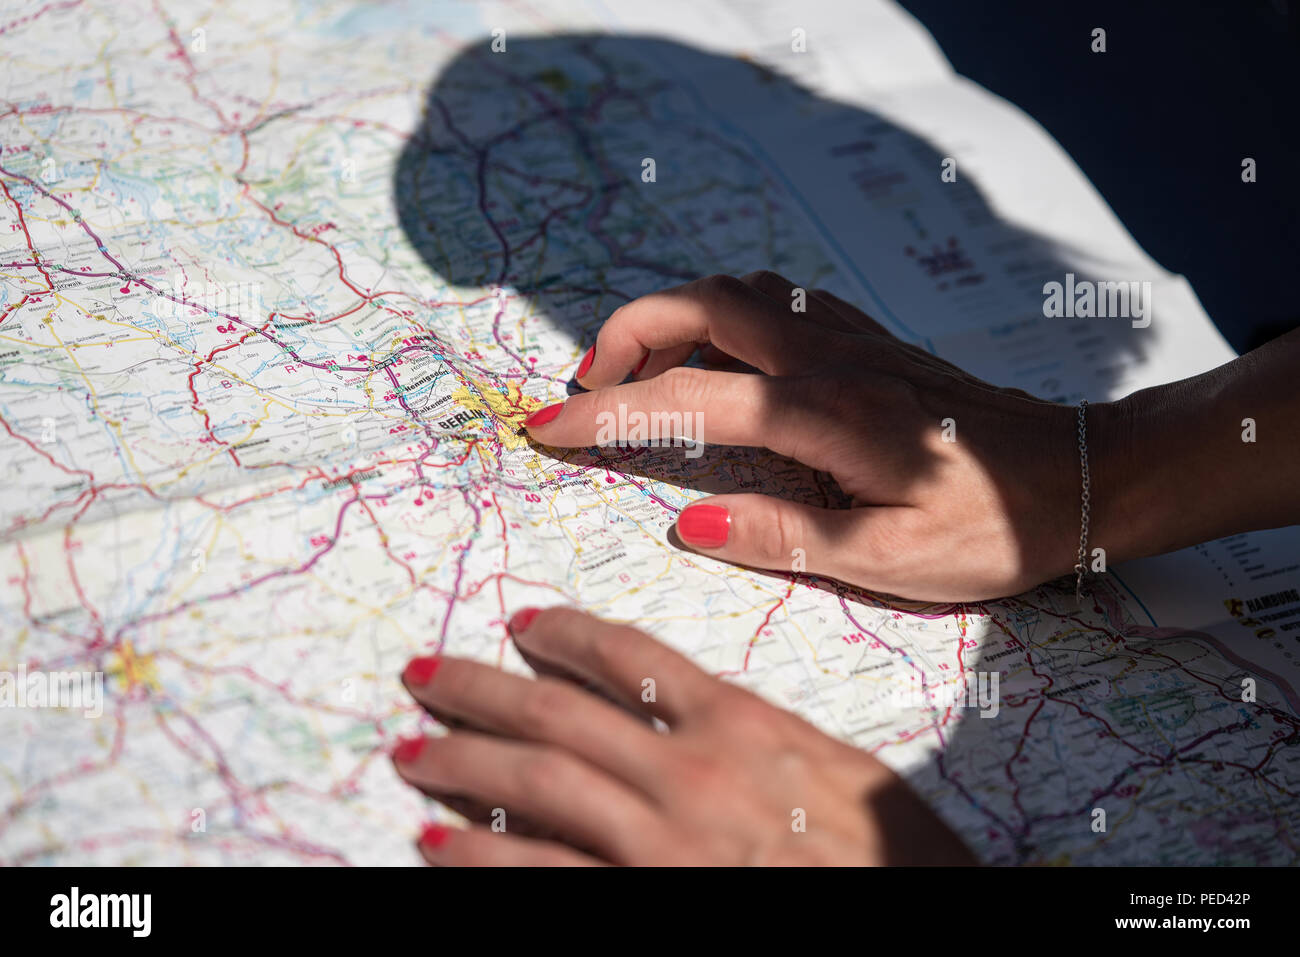 A woman is reading a road atlas in Germany. Stock Photo